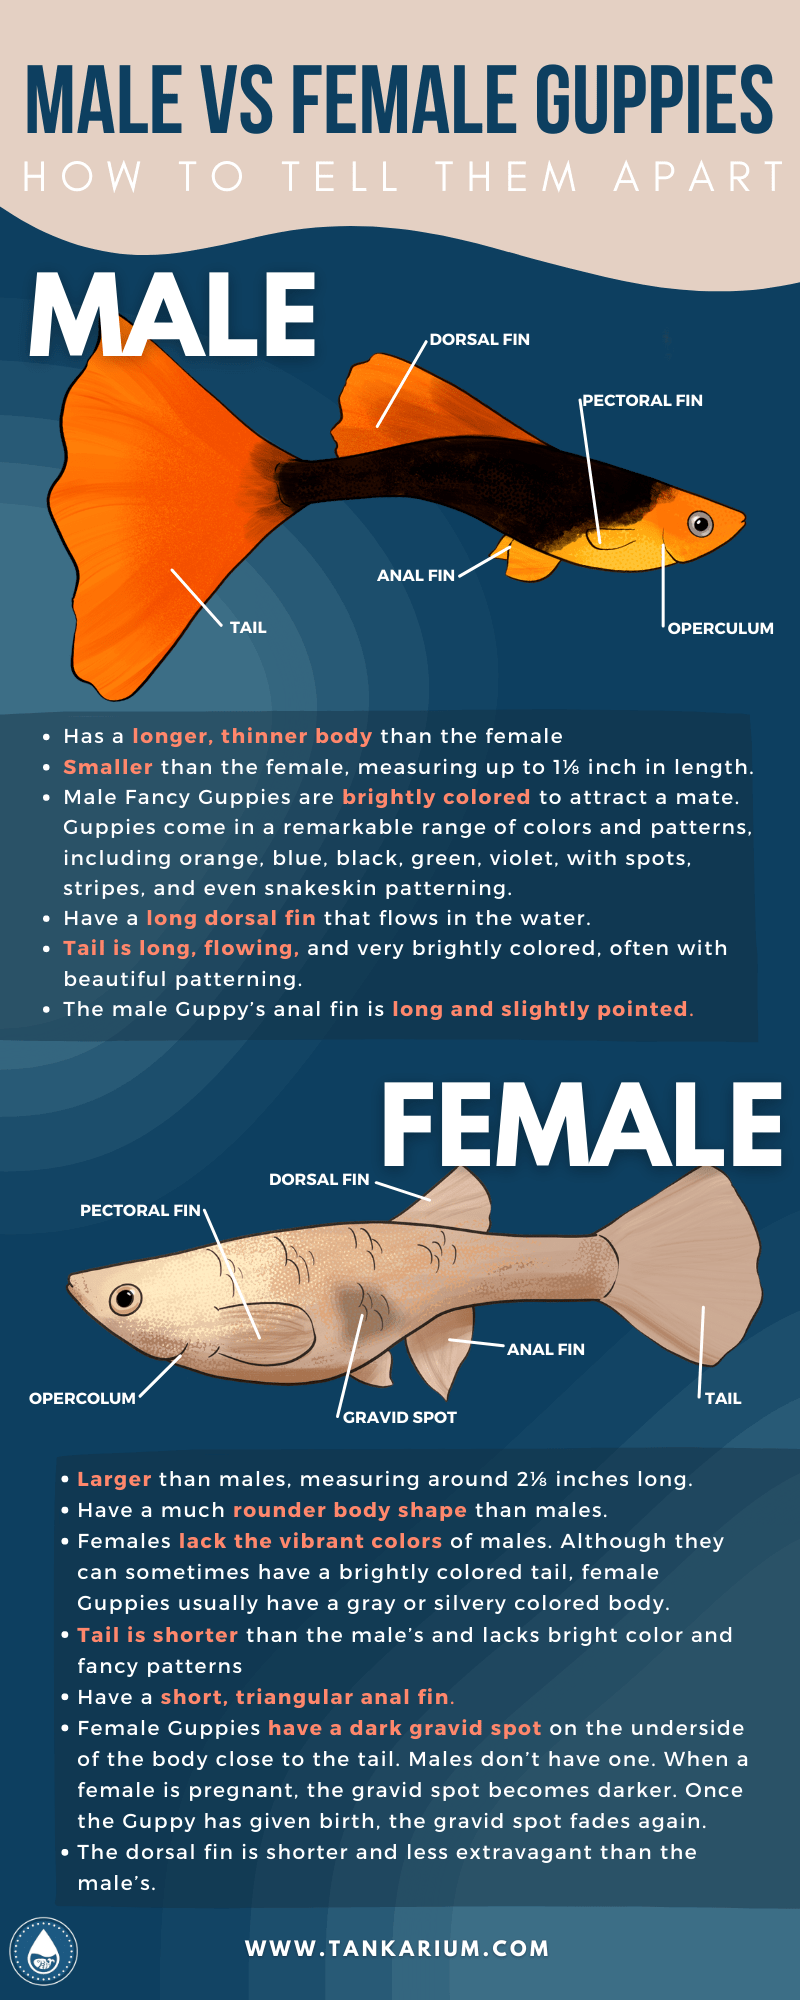 Male Vs. Female Guppies: How To Tell Them Apart - infograhics